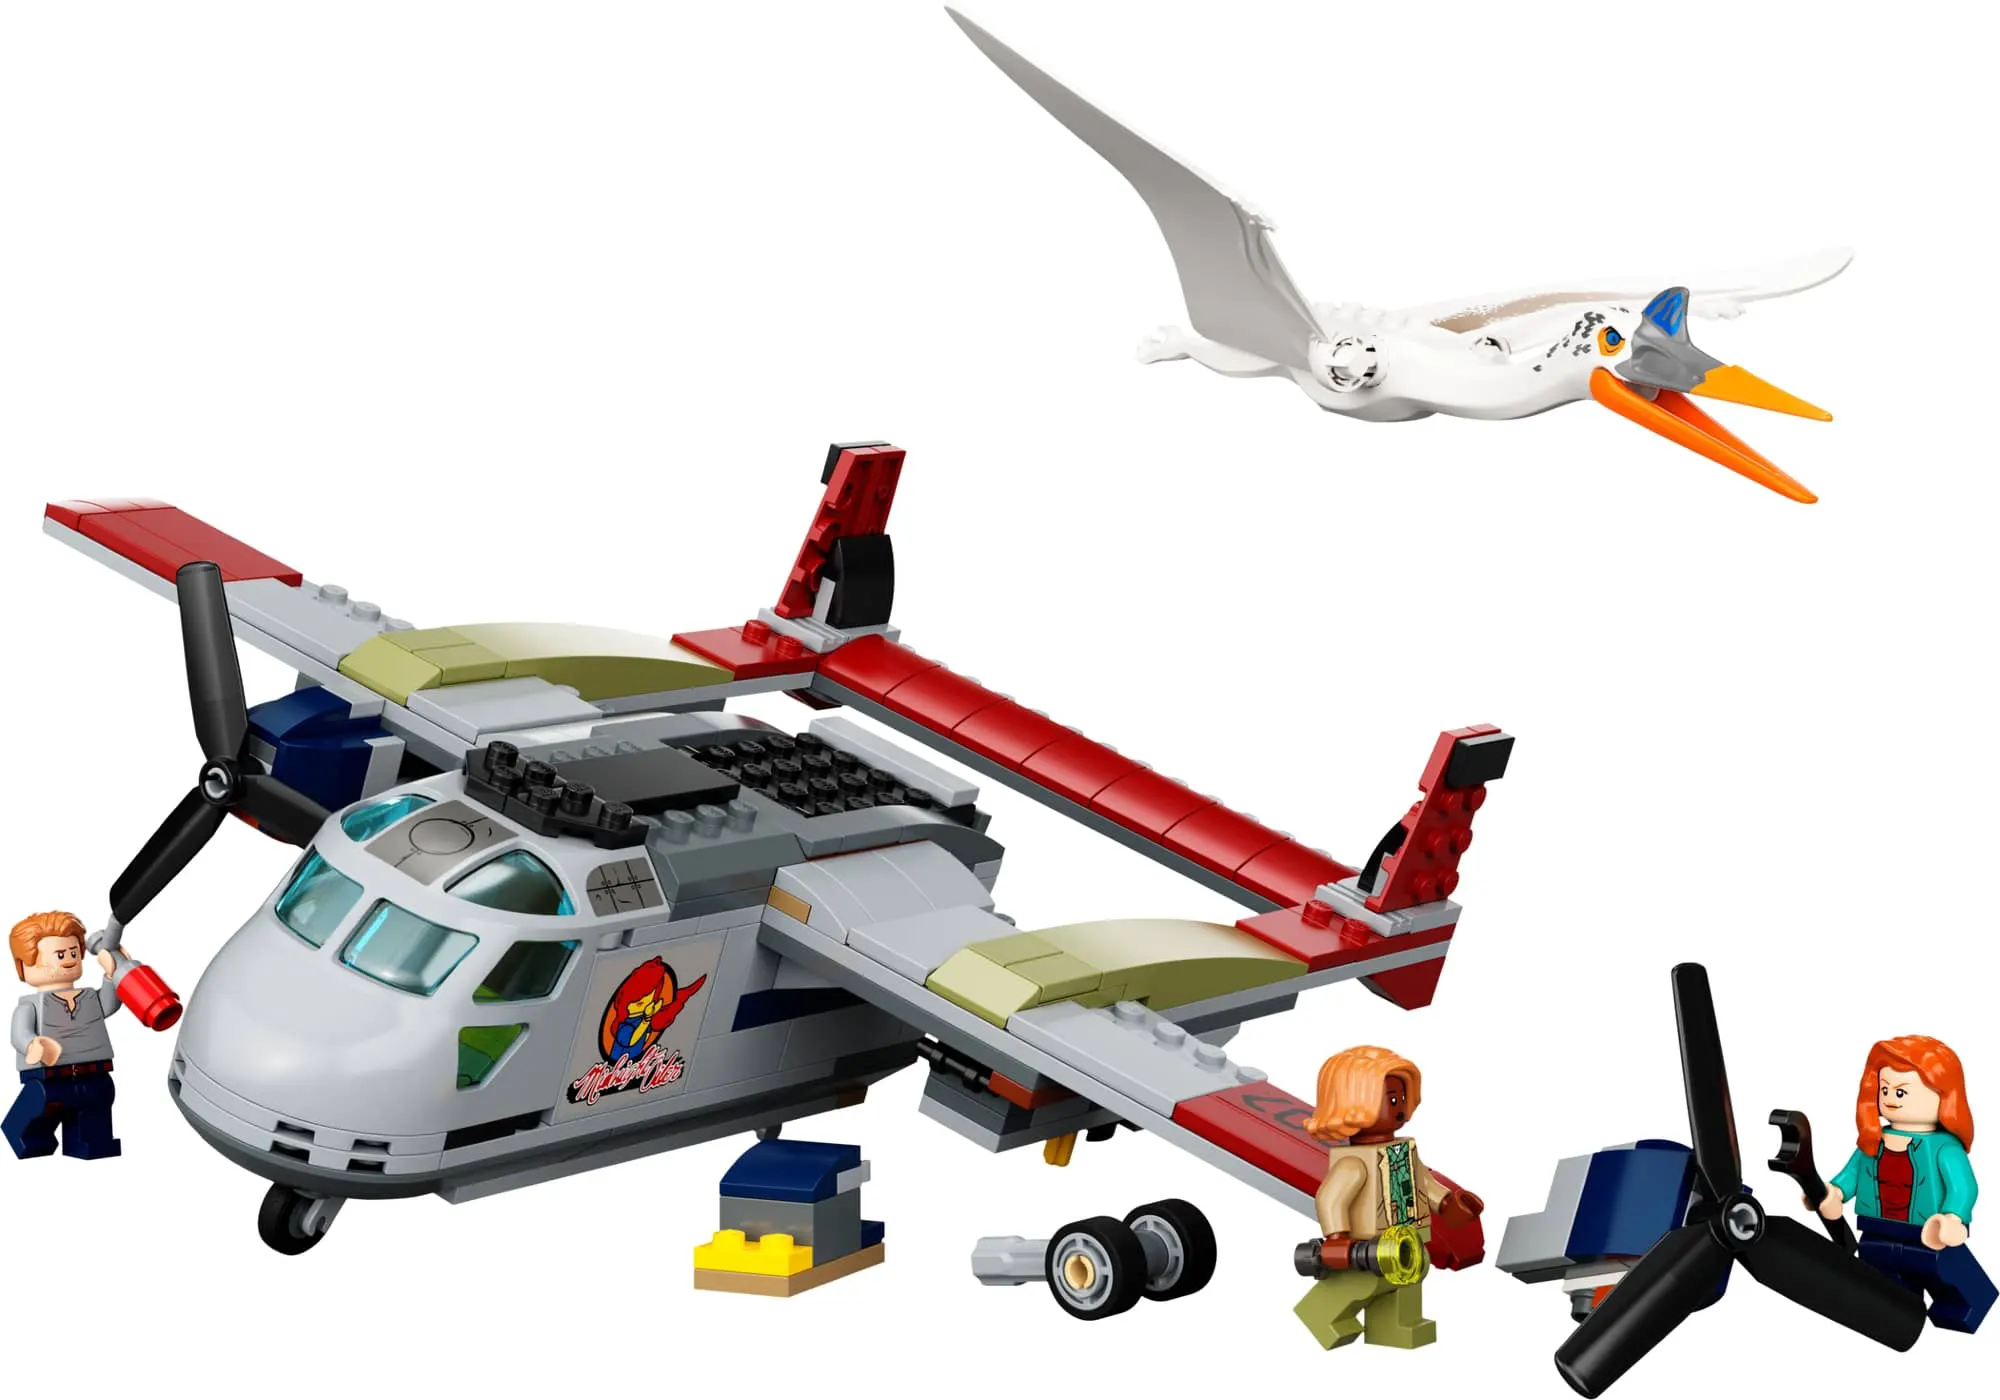 LEGO Jurassic World Officially Revealed, T-Rex,Quetzalcoatlus, Atrociraptor, Therizinosaurus, Duplo and more | New for April 17th